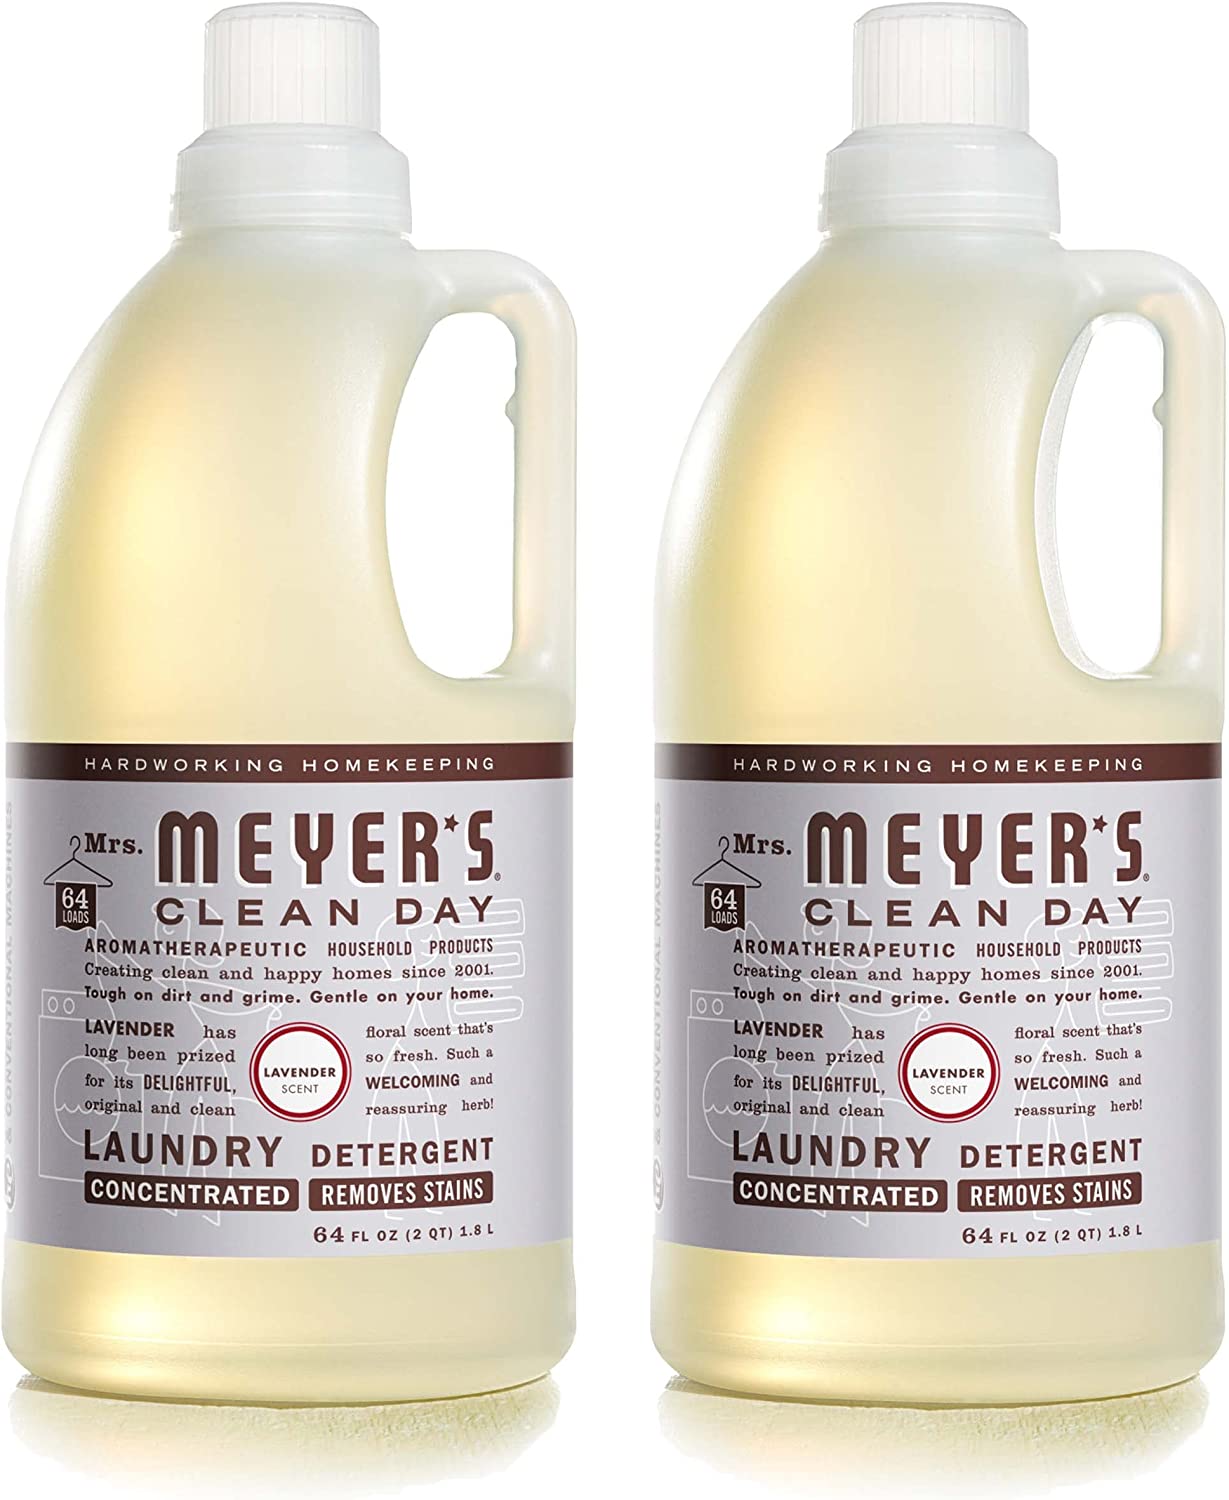 Mrs. Meyer’s Clean Day High Efficiency Natural Laundry Detergent, 128-Loads